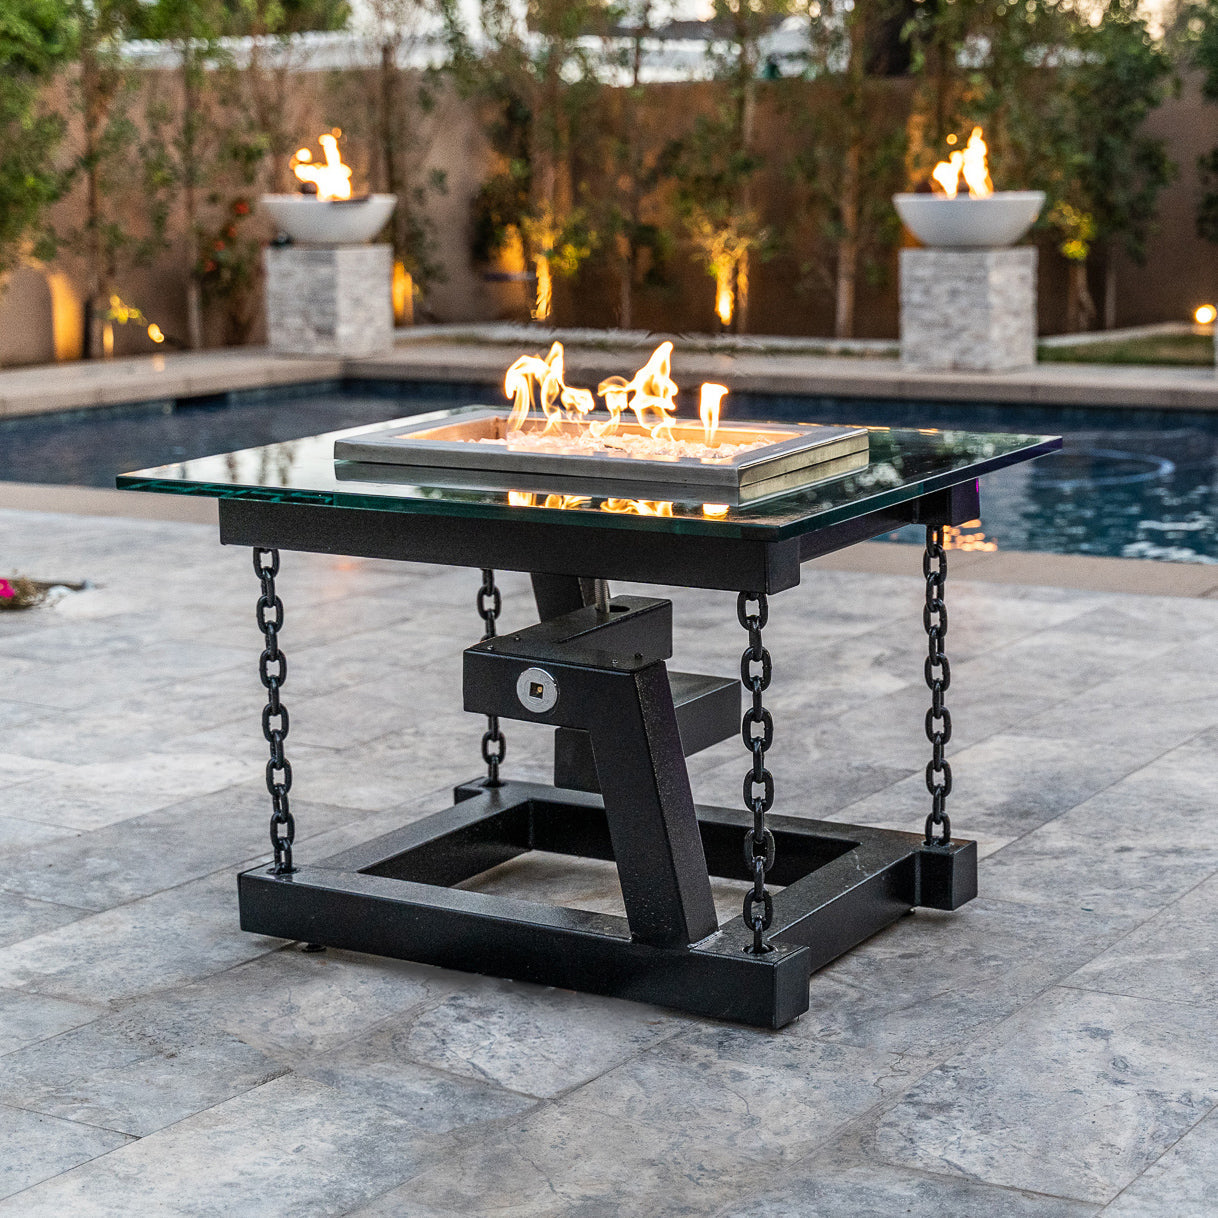 The Outdoor Plus Newton 52" Copper Vein Powder Coated Metal Liquid Propane Fire Pit with Chain Support & Match Lit Ignition